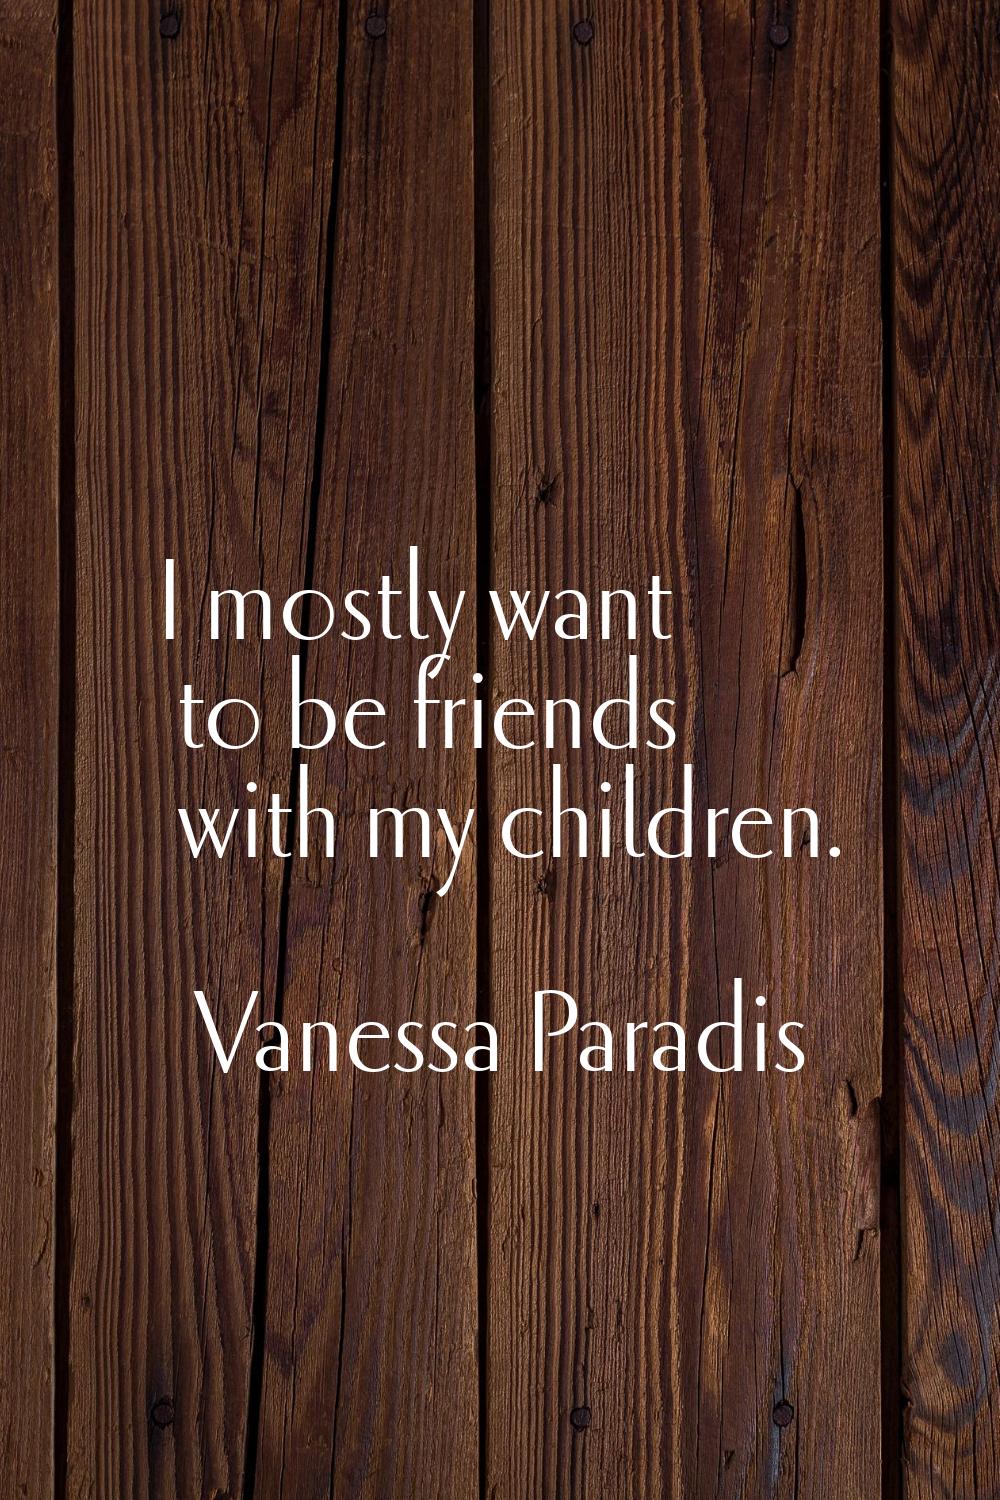 I mostly want to be friends with my children.